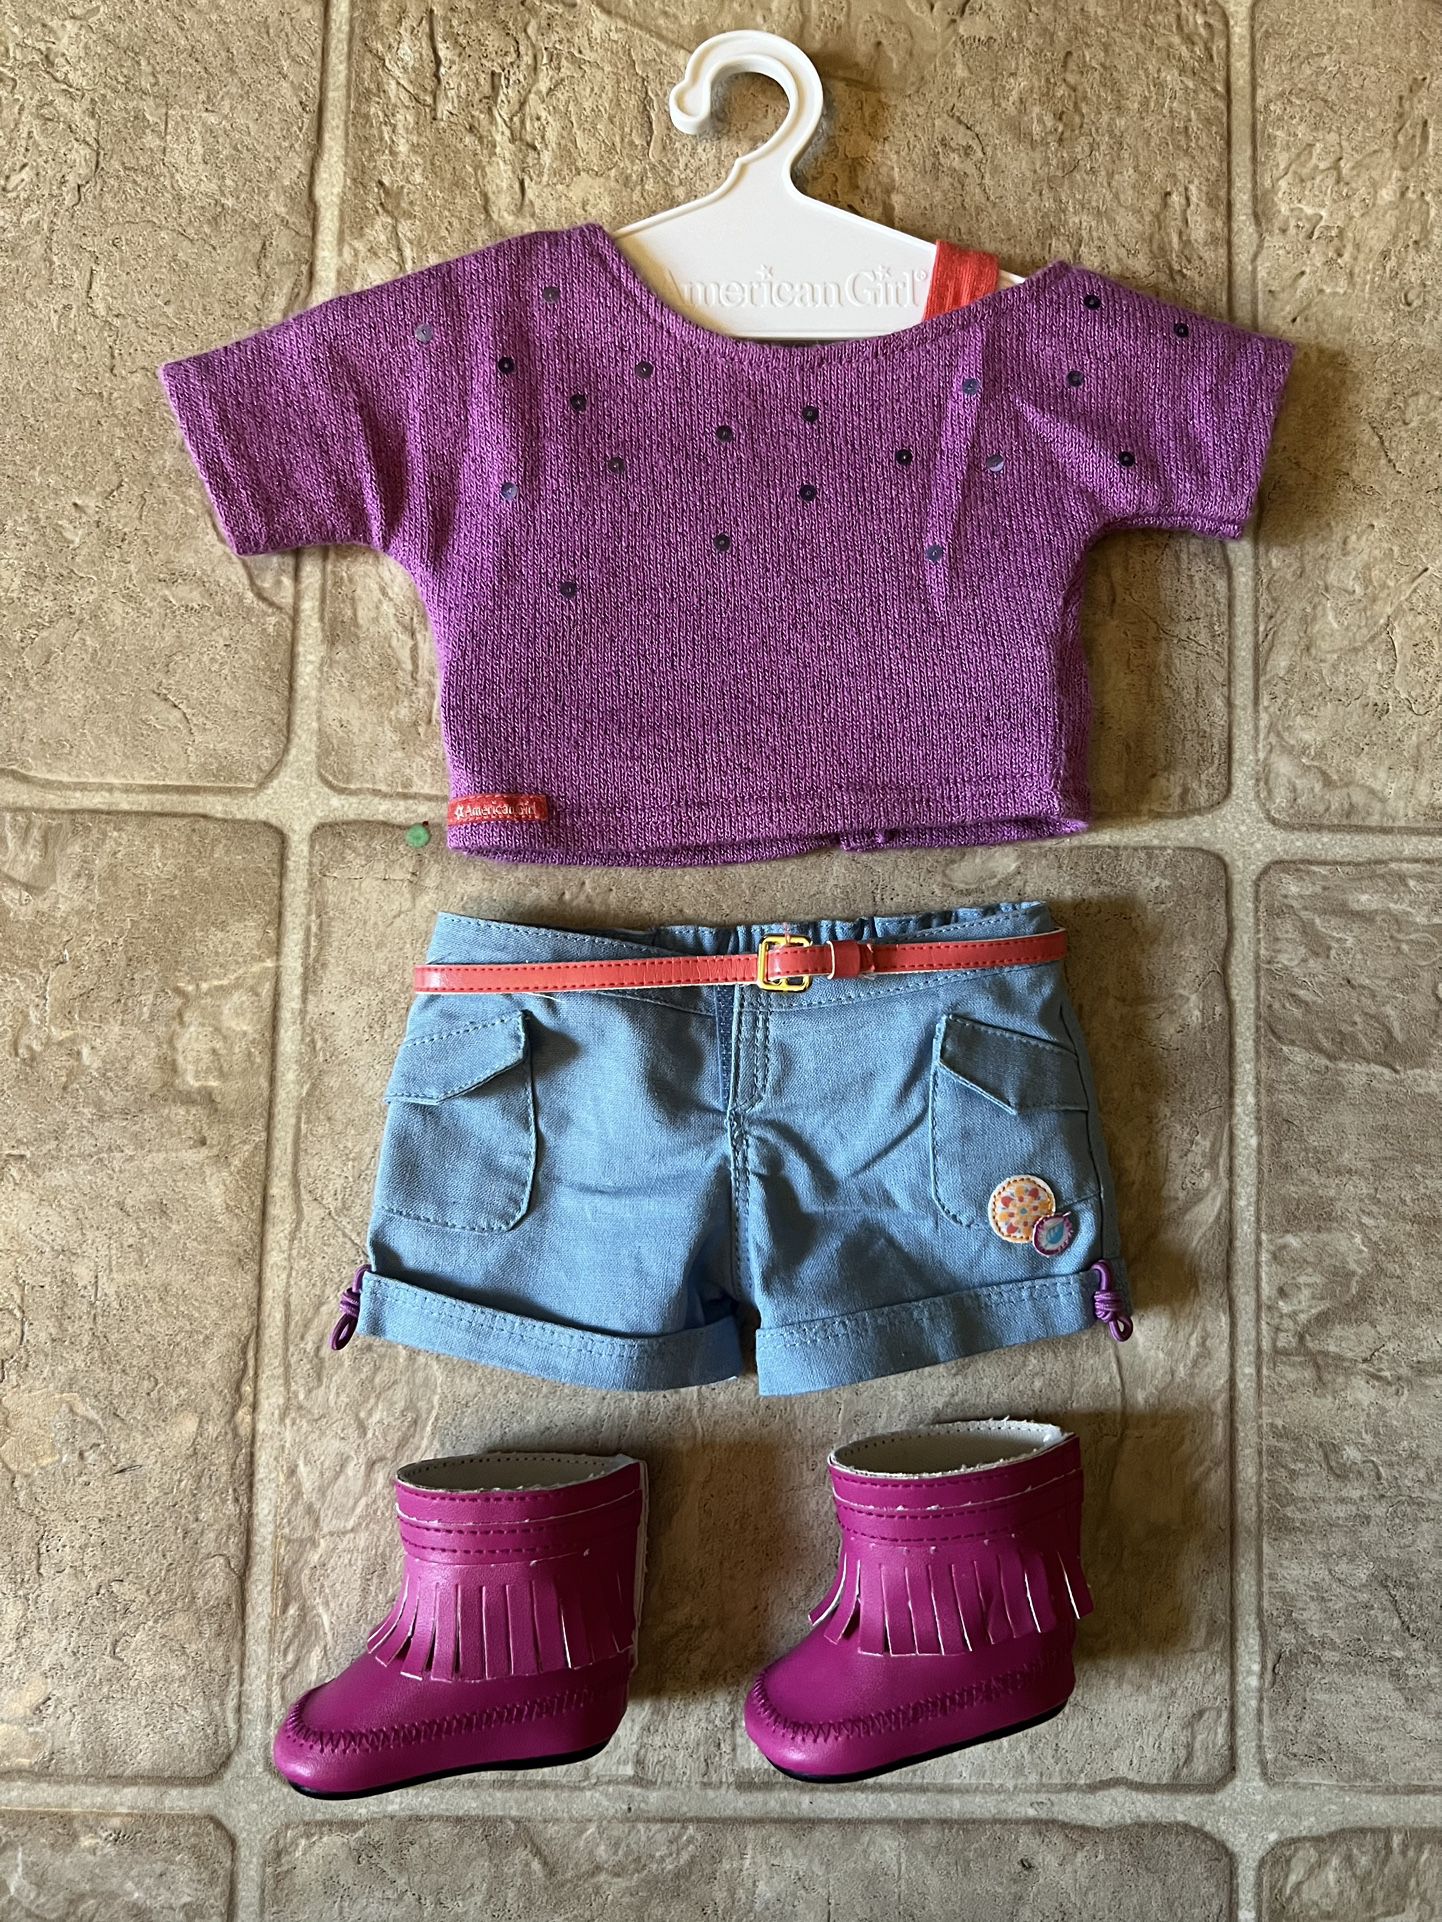 American Girl Doll - Clothes 